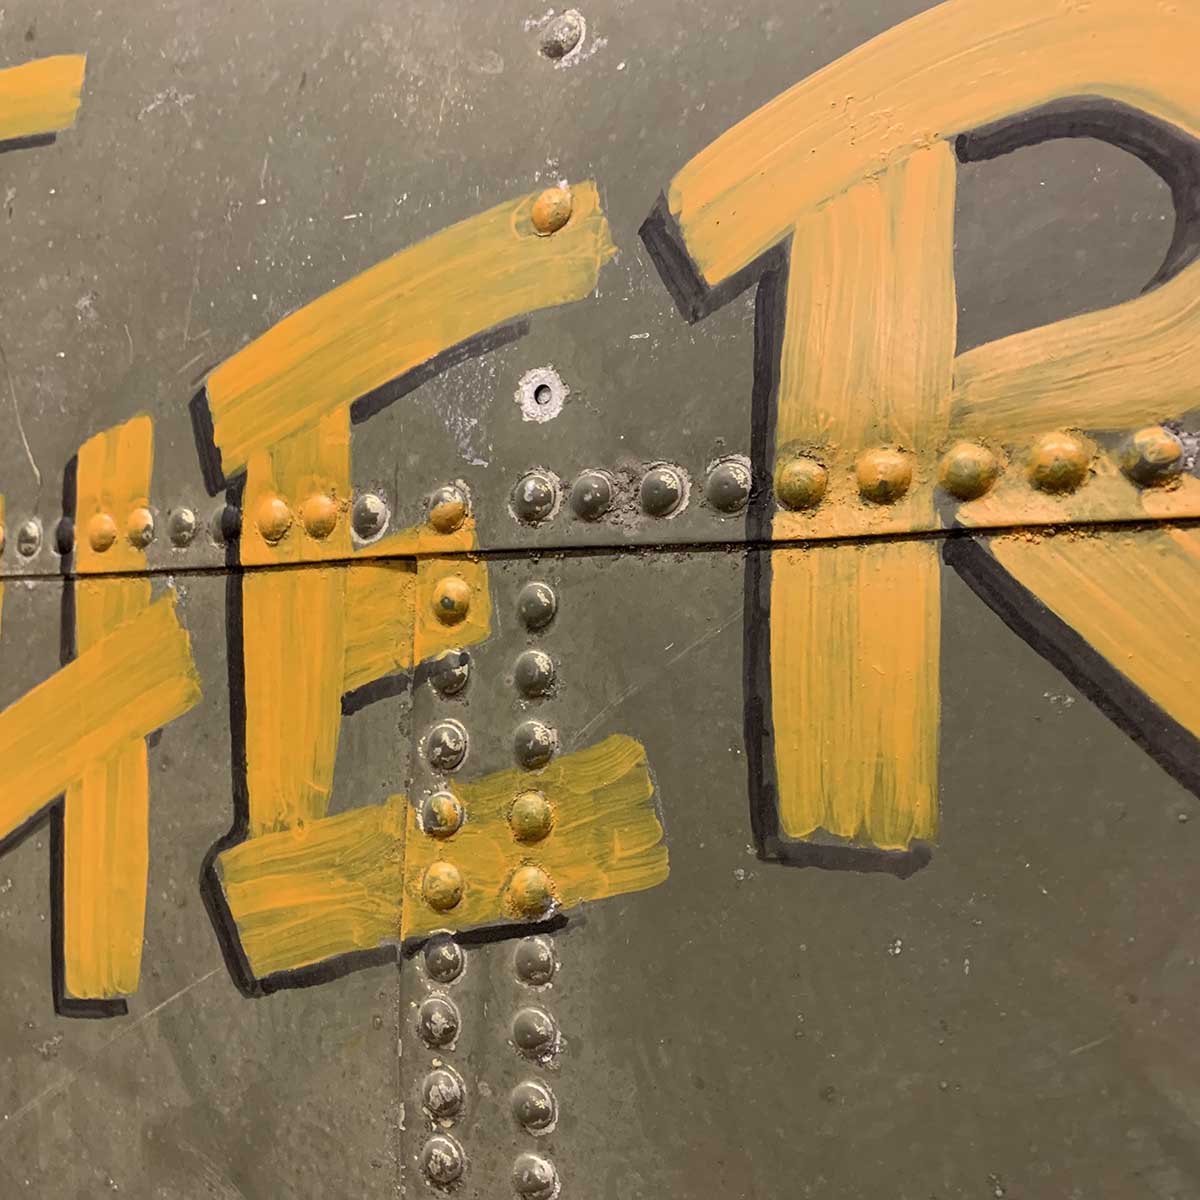 Detail of original C-47 Dakota skin panel painted with That's all Brother nose art.